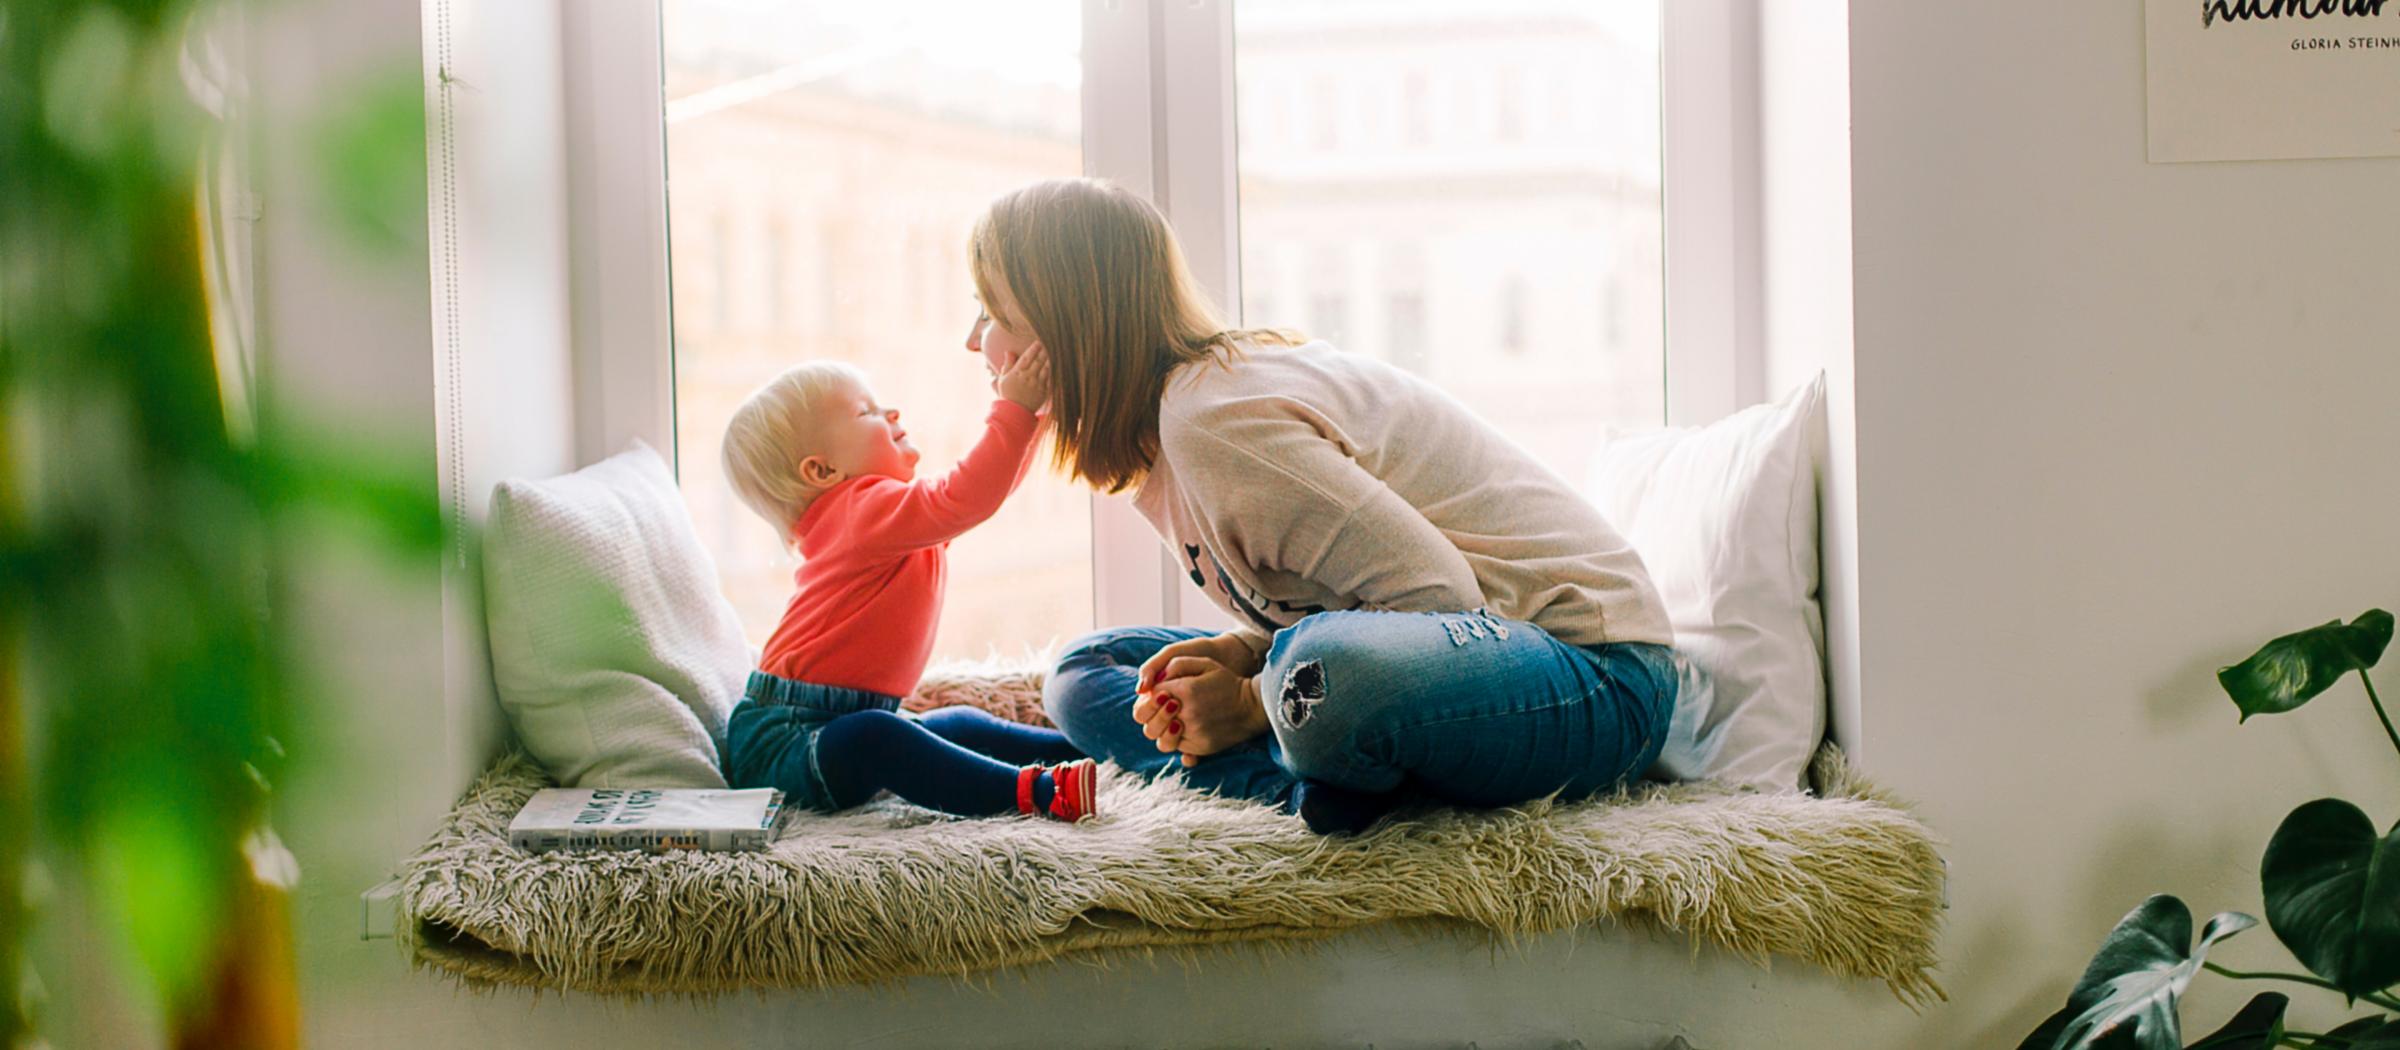 A mother and baby play on a window seat at home